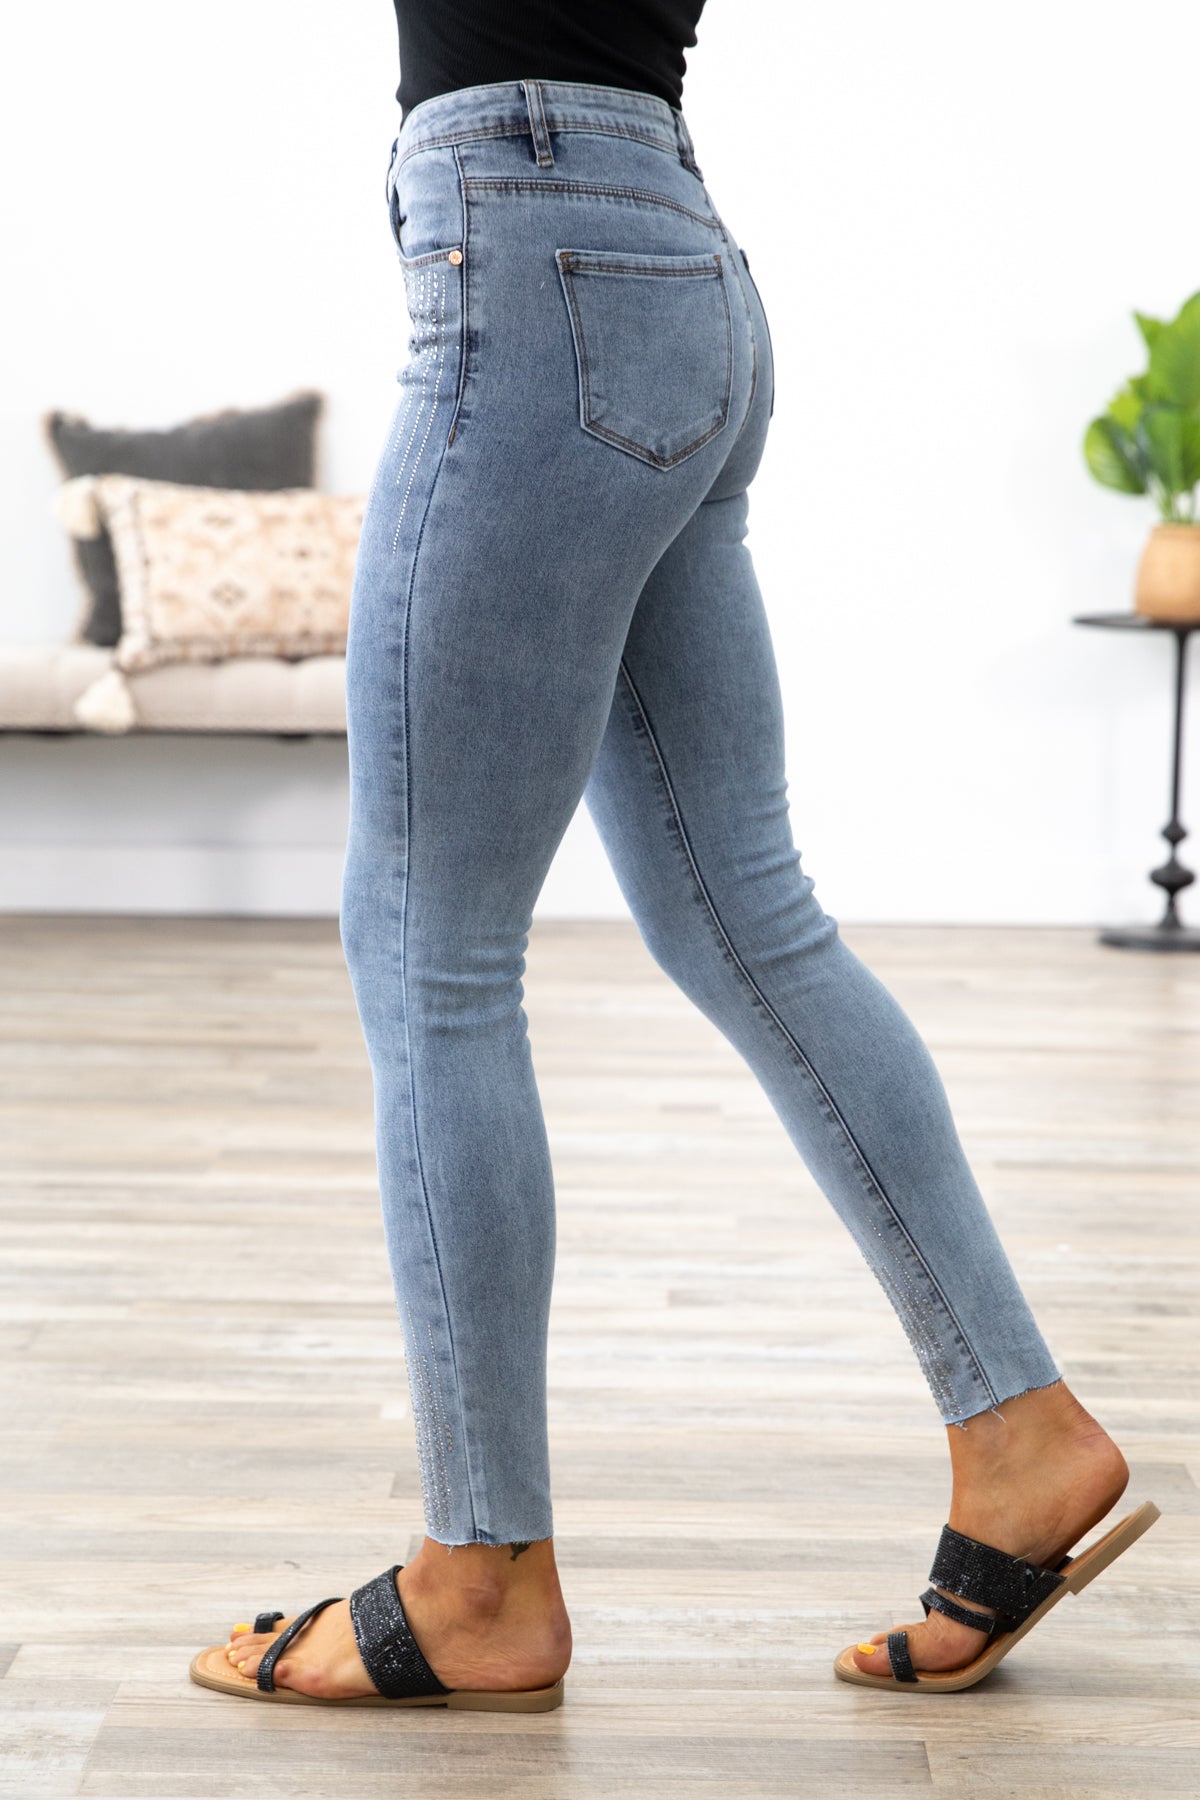 Light Wash Rhinestone Detail Skinny Jeans - Filly Flair